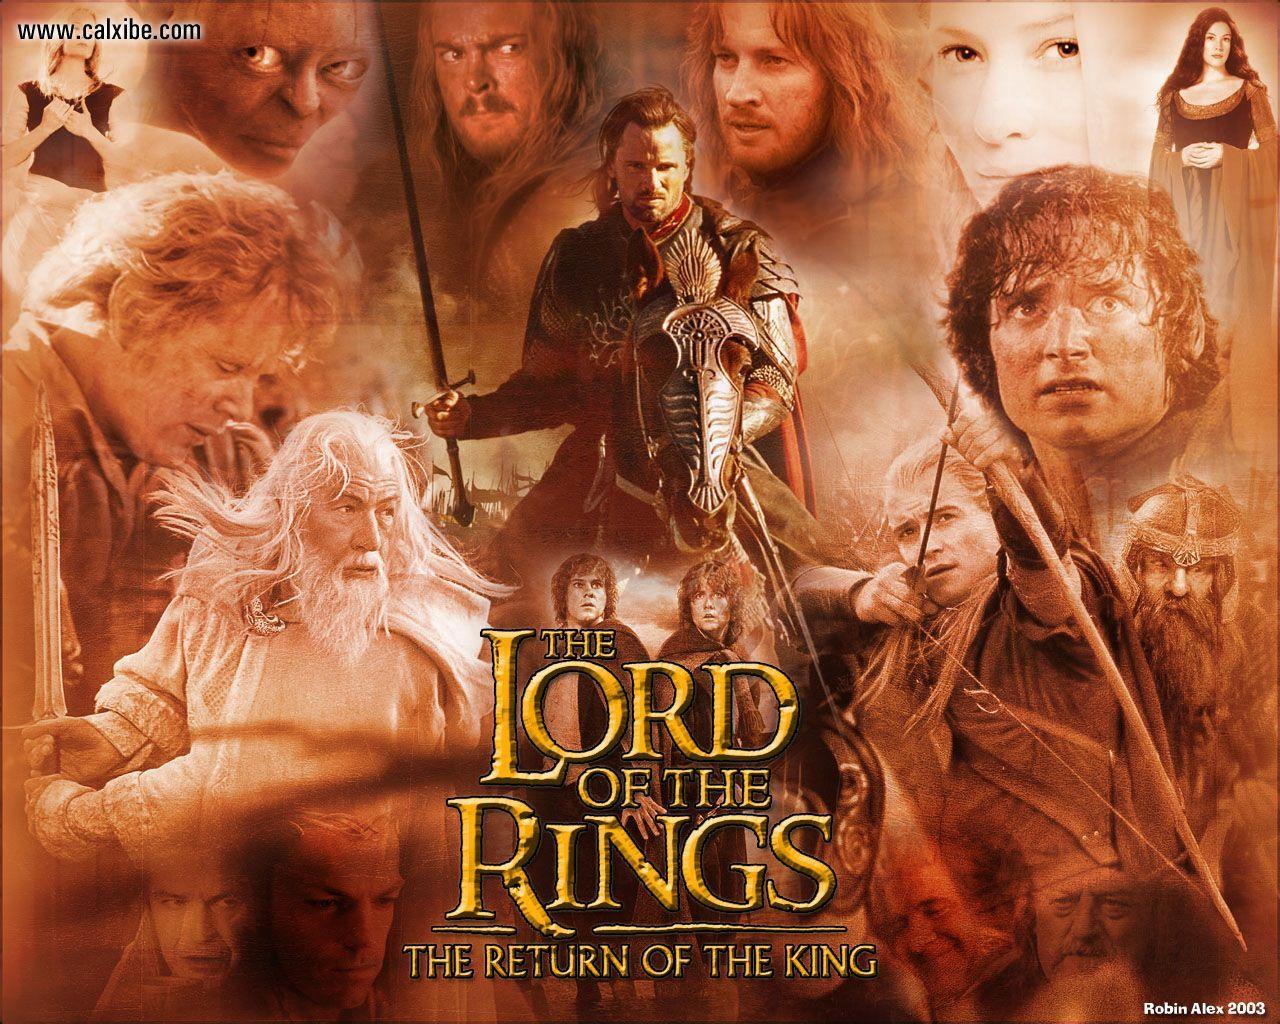 Movies: The Lord of the Rings: The Return of the King, picture nr. 8193